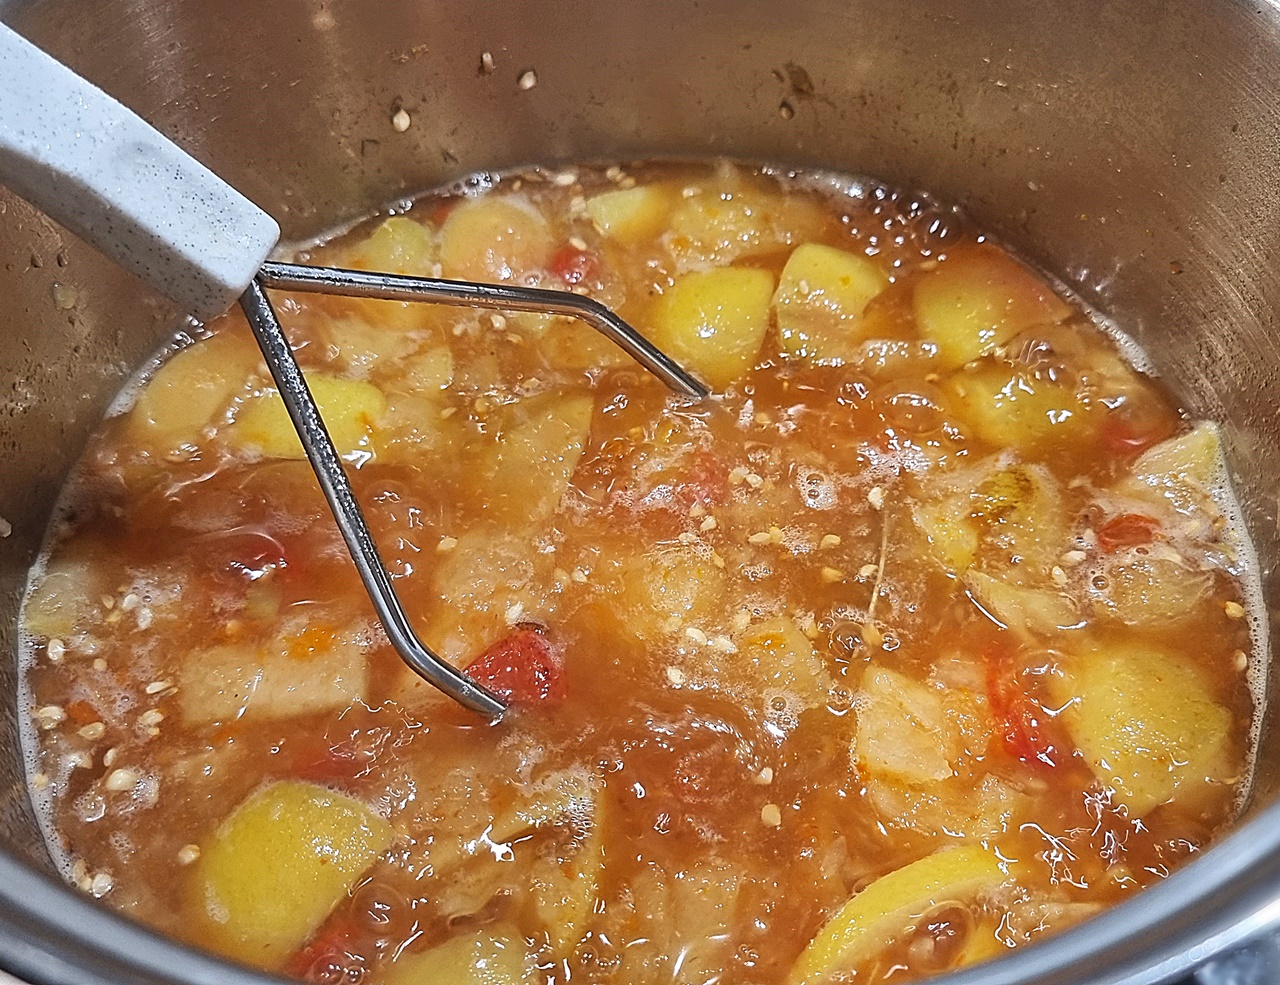 Cooked rosehips, apples and lemons slices looking pulpy.